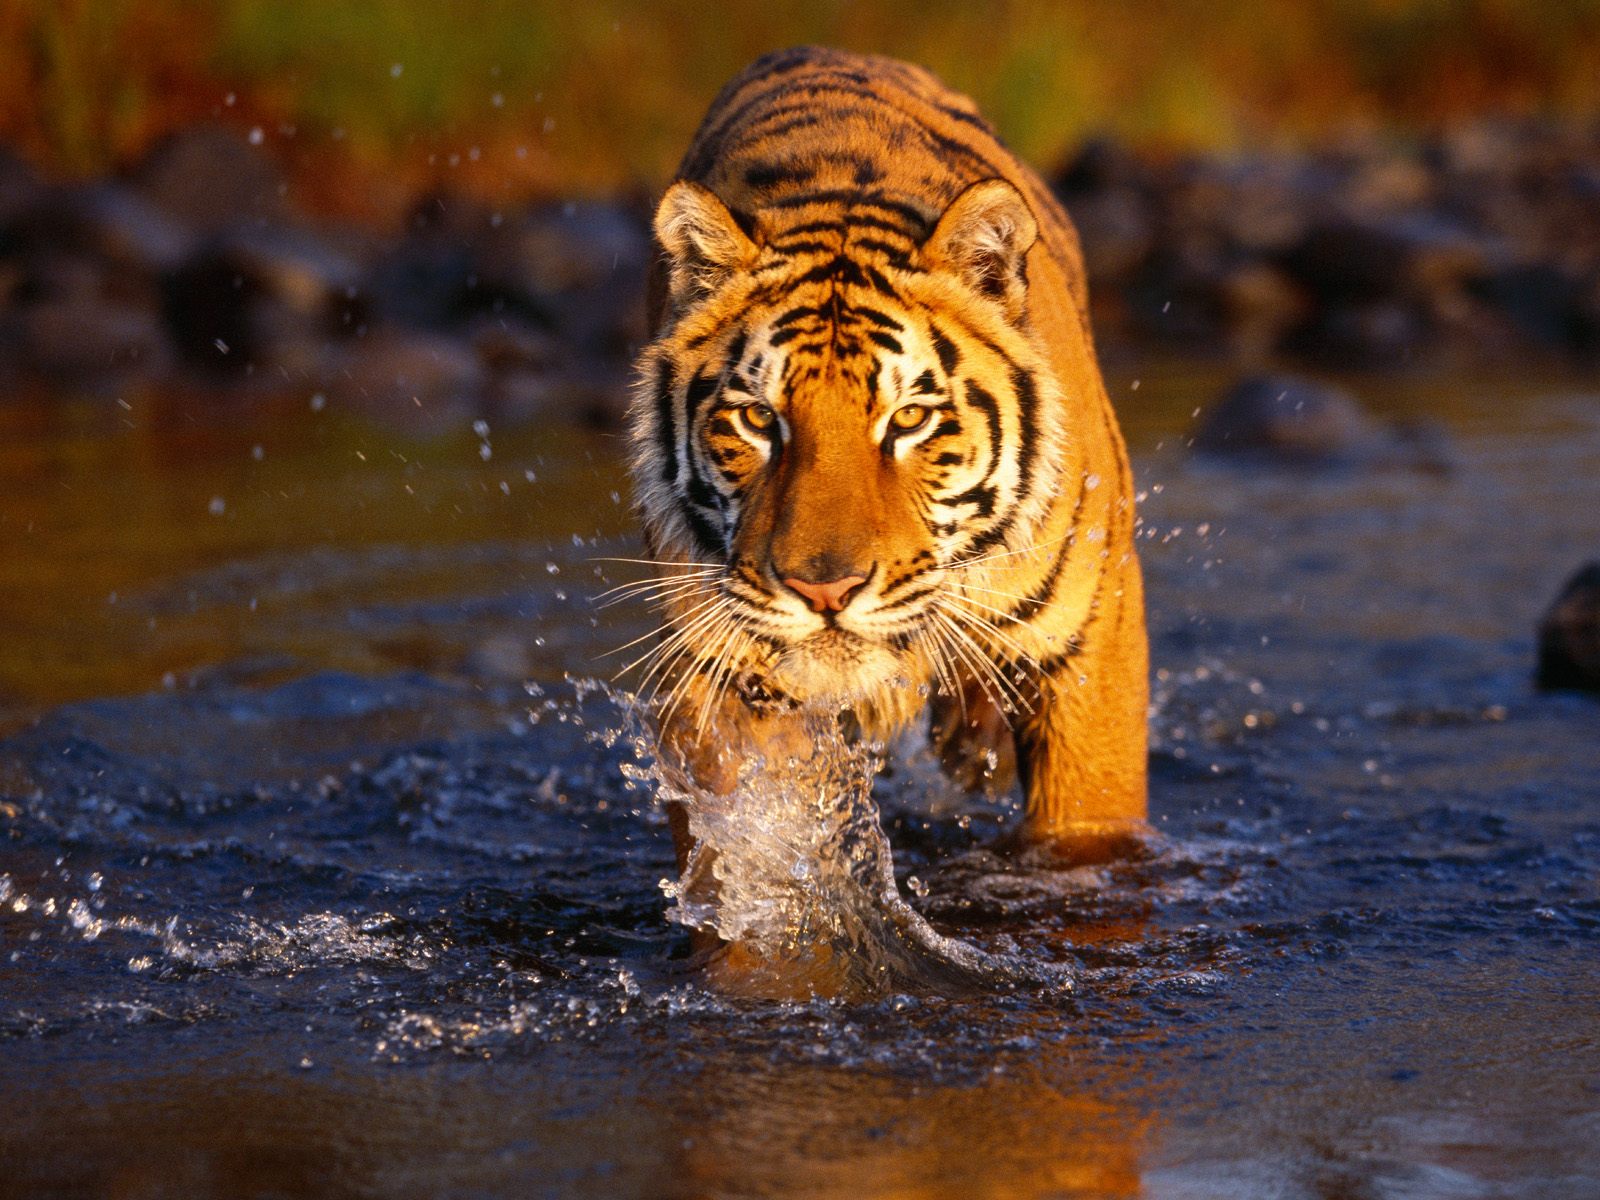 Great hd picture with a golden brown tiger walking throught the water.